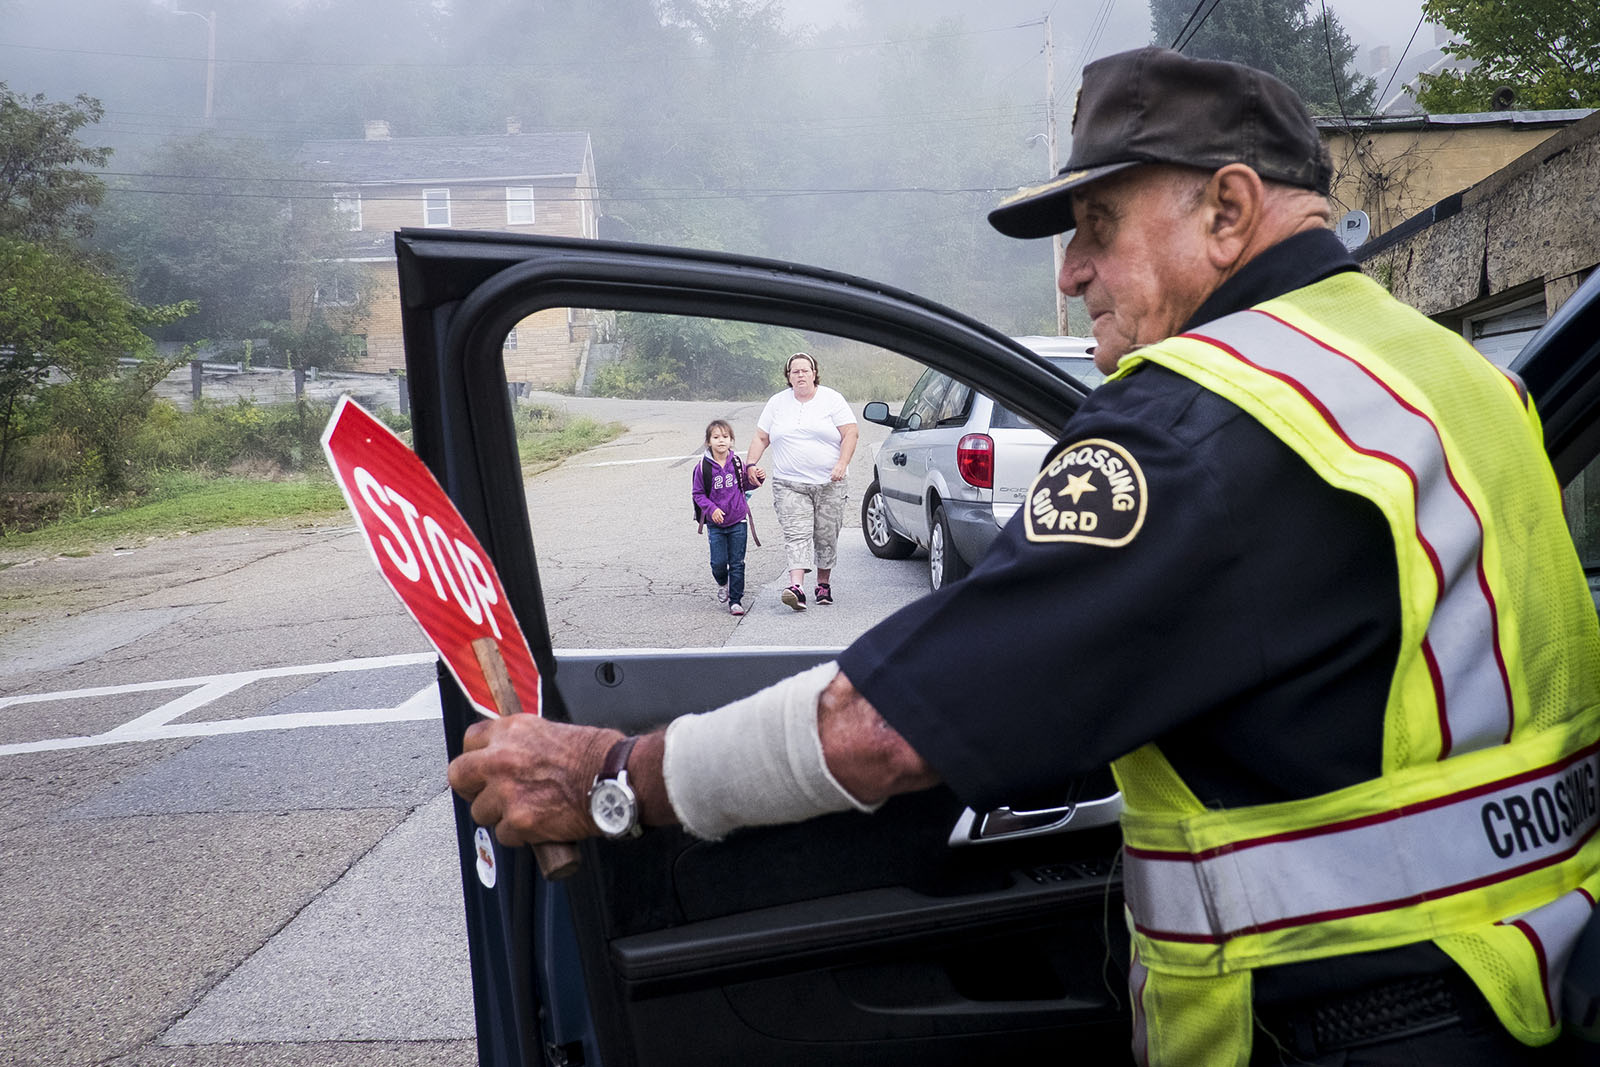 A crossing guard keeps watch; in the background, a mother walks her child to school.